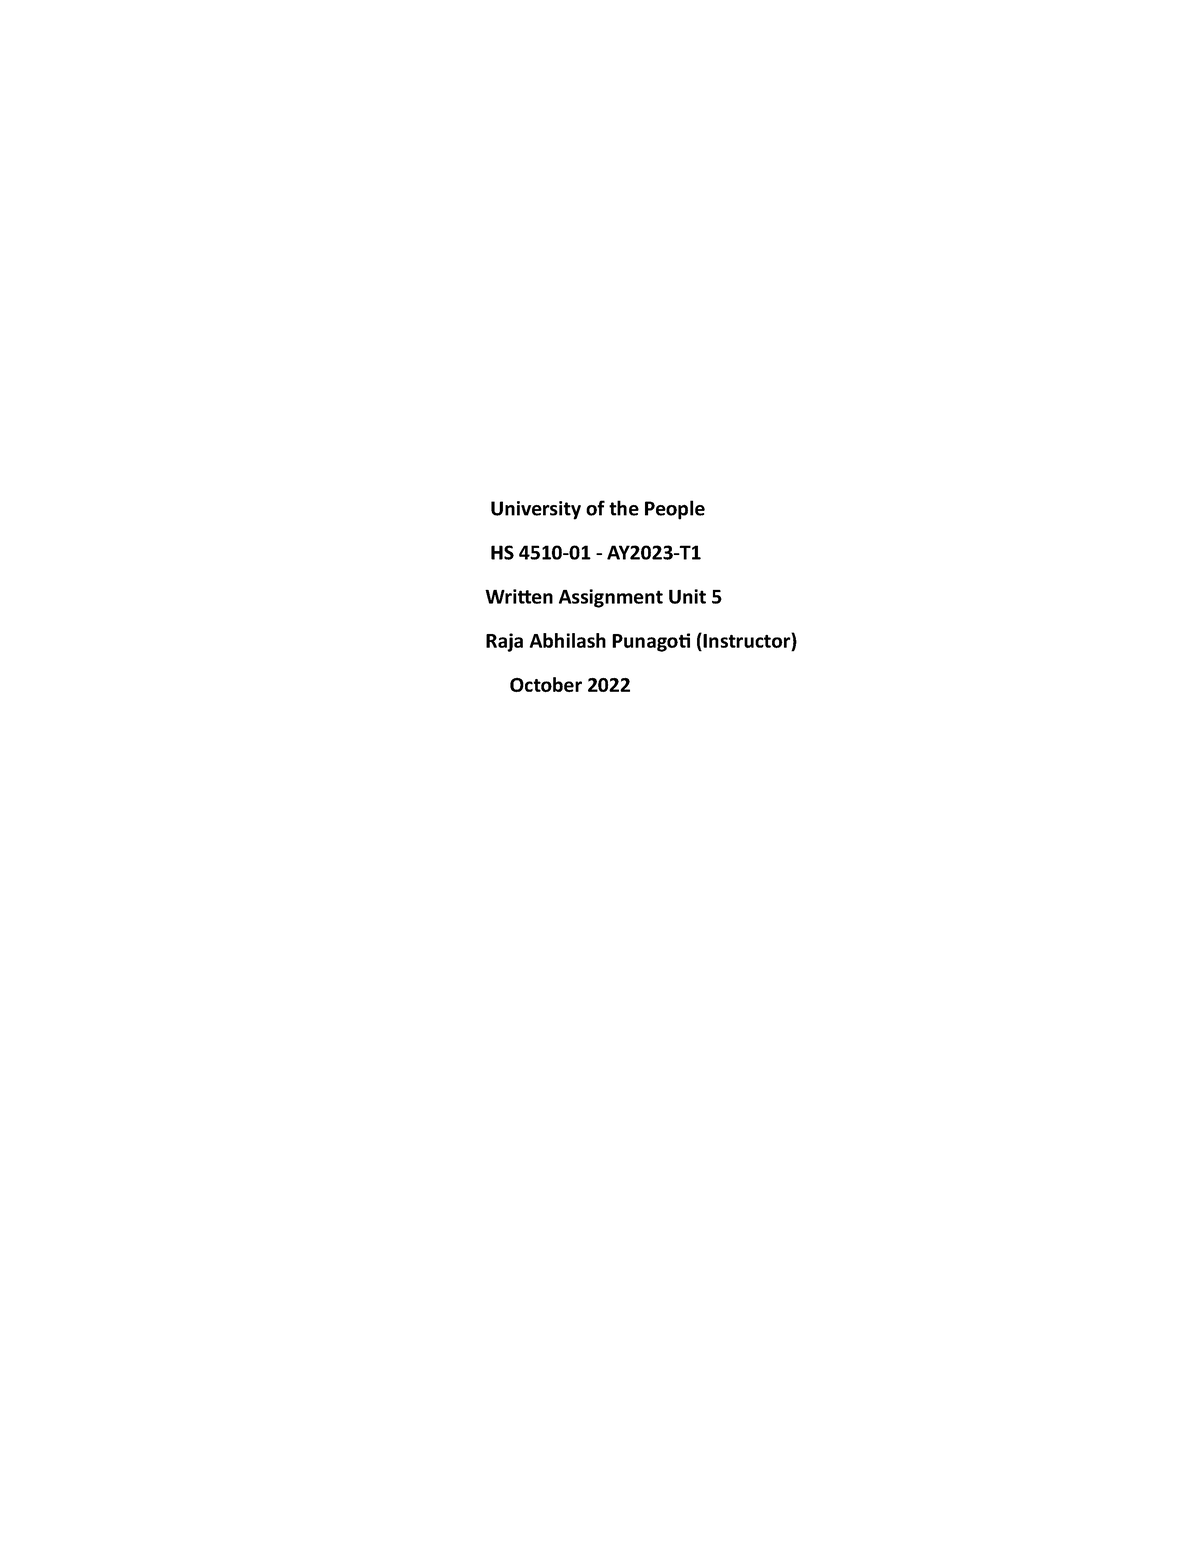 HS 4510 Written Assignment UNIT 5 - University of the People HS 4510-01 ...